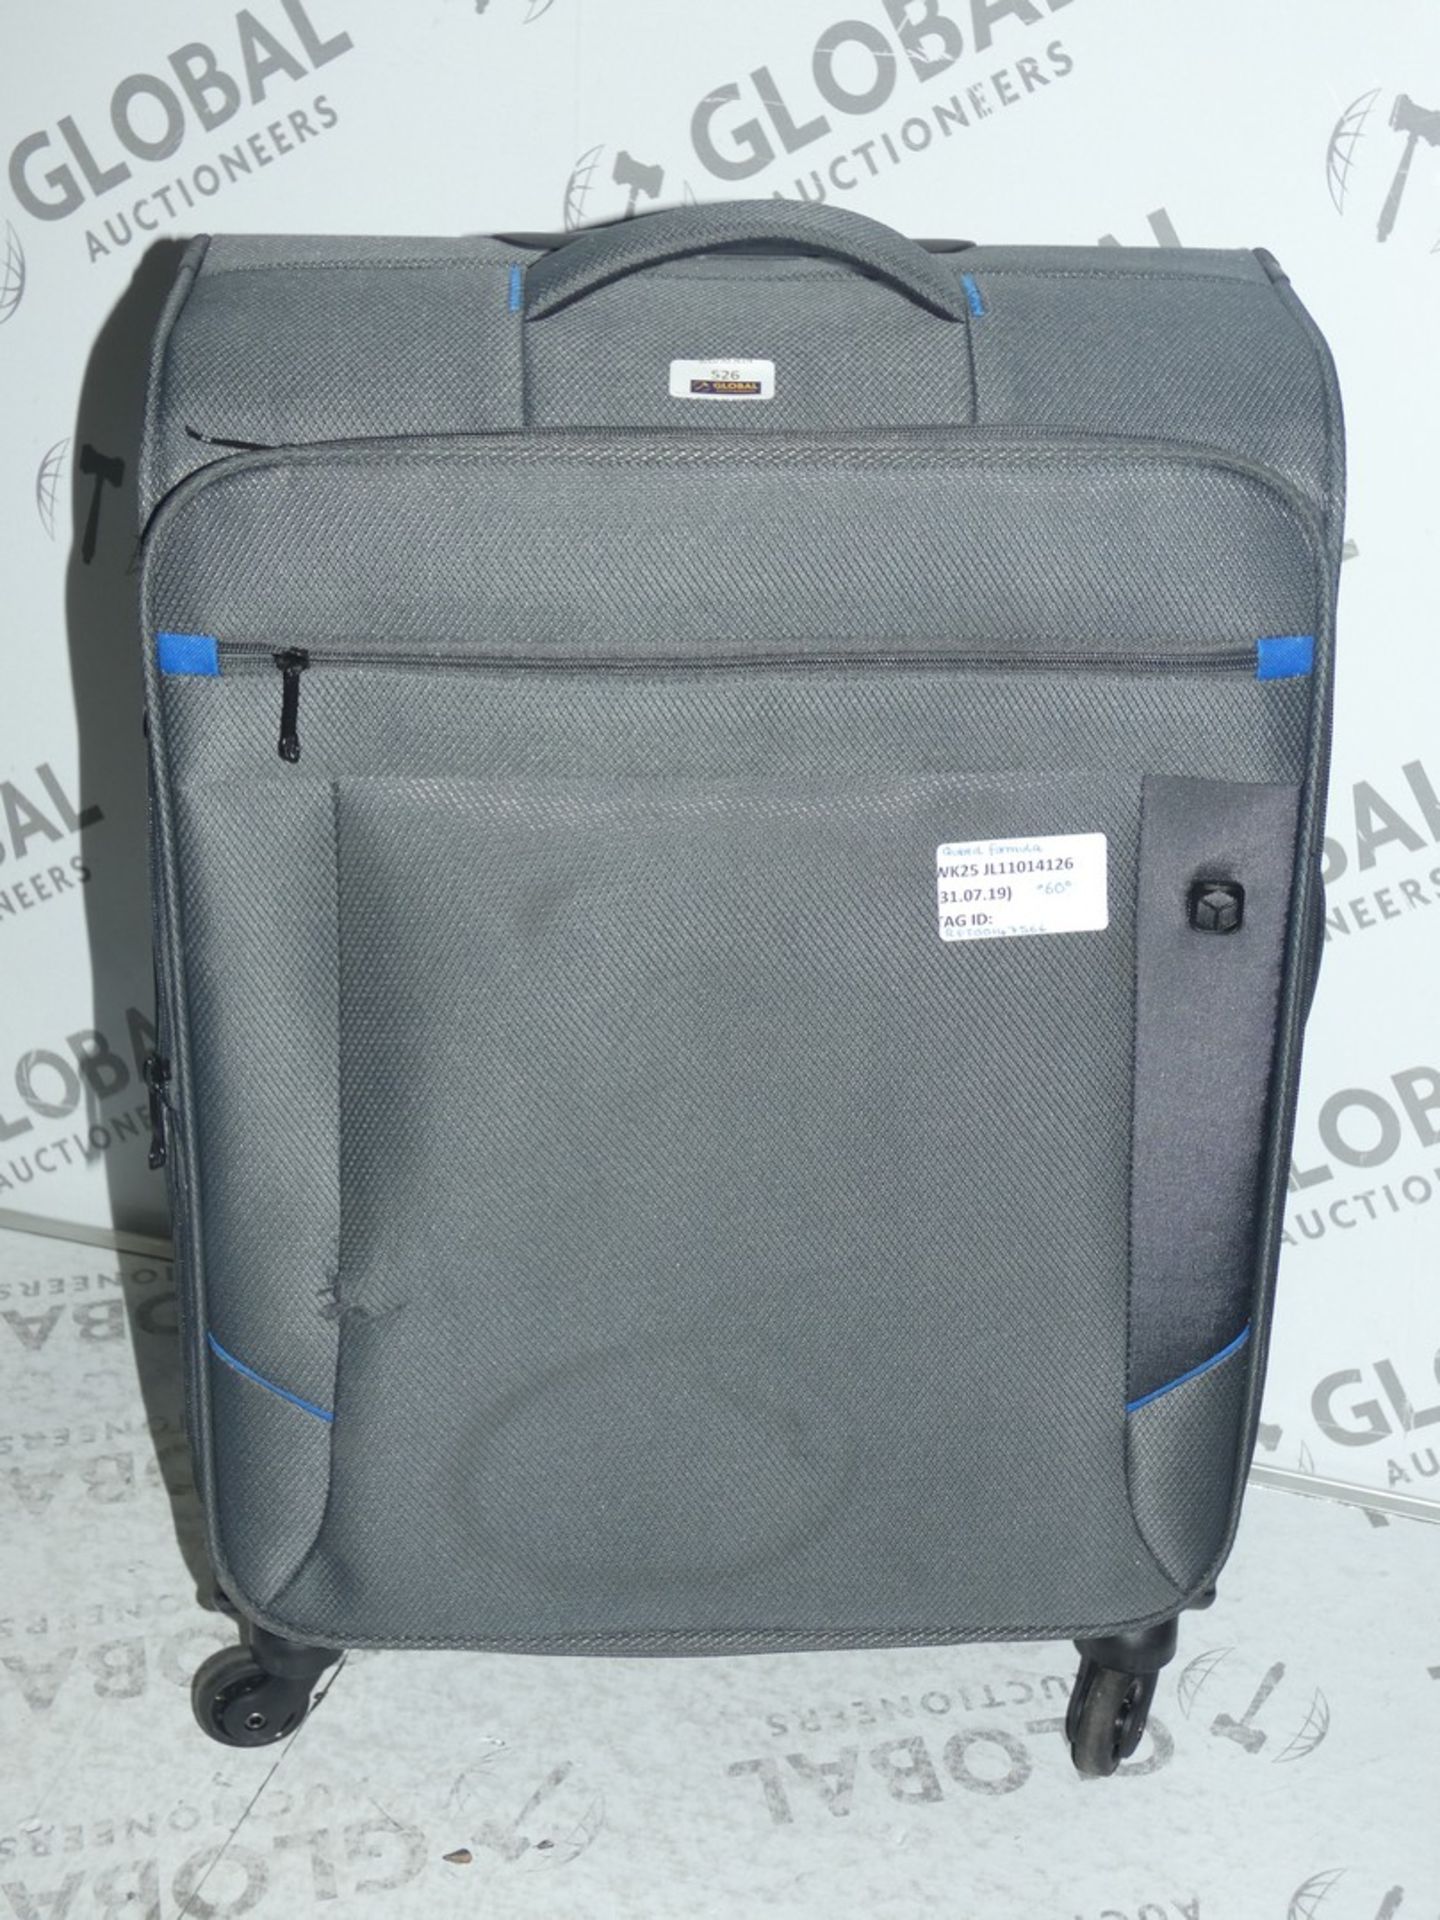 Qube Formula Soft Shell Grey Spinner Suitcase RRP £60 (RET00147533) (Viewings And Appraisals Are